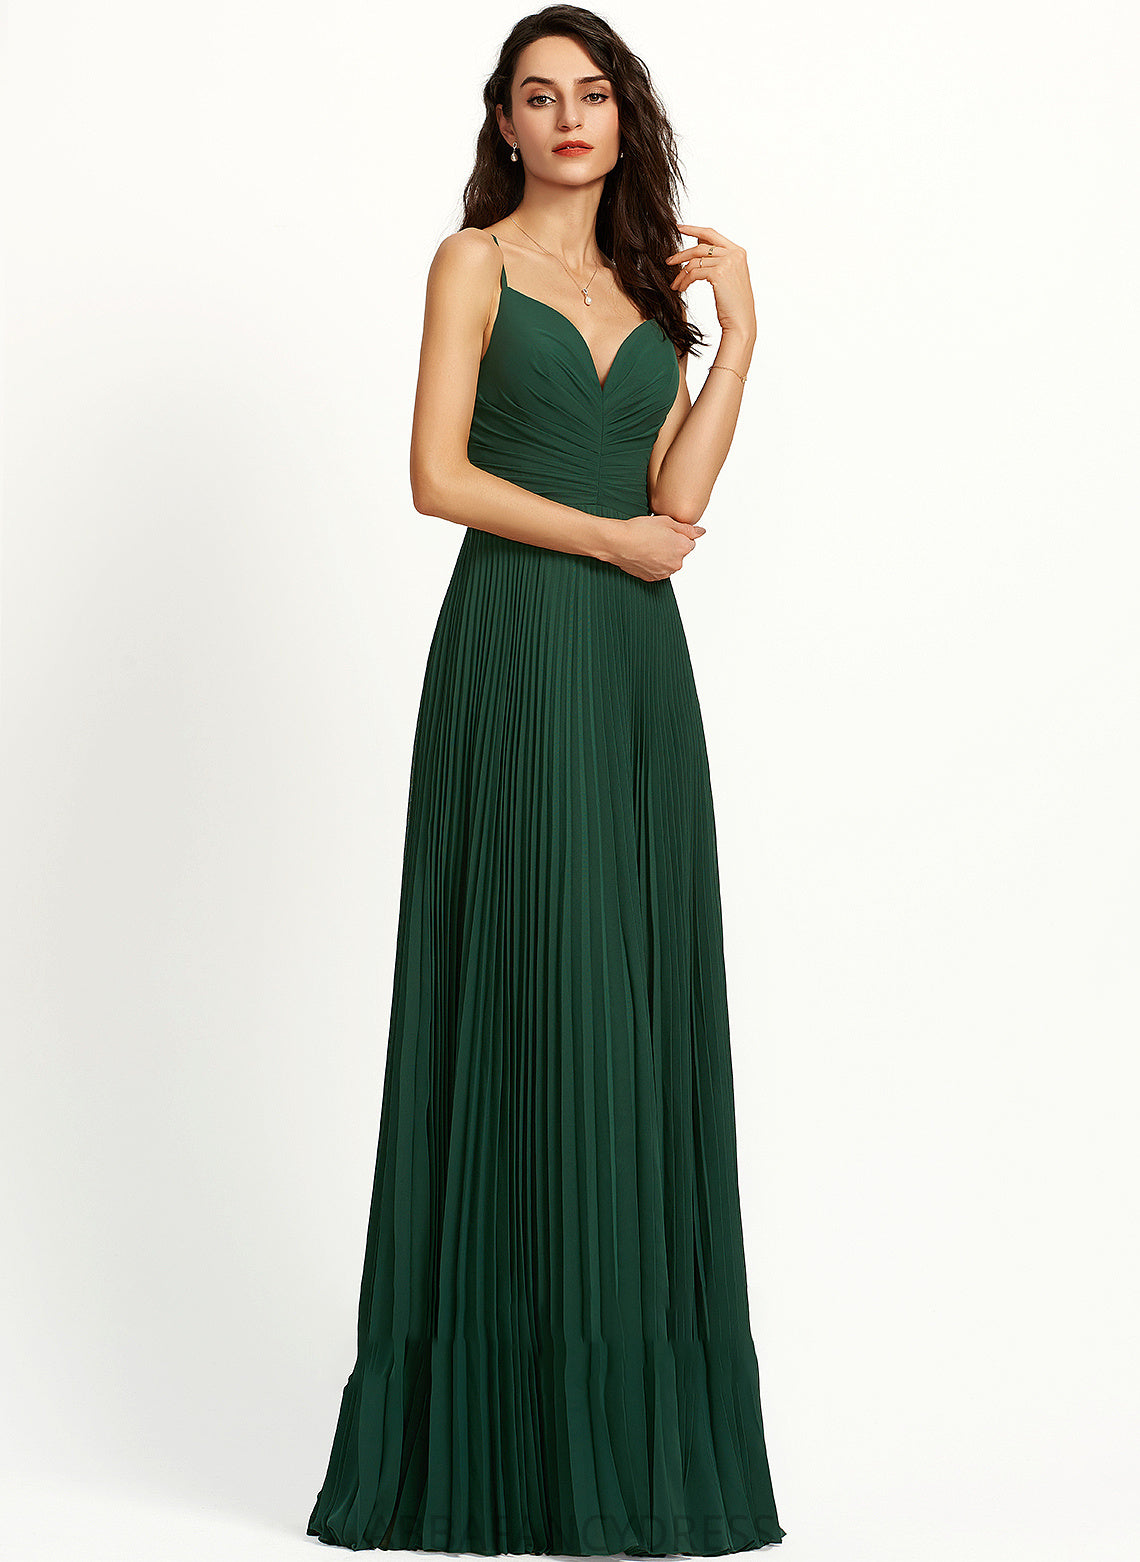 Pleated A-Line V-neck Bryanna With Prom Dresses Floor-Length